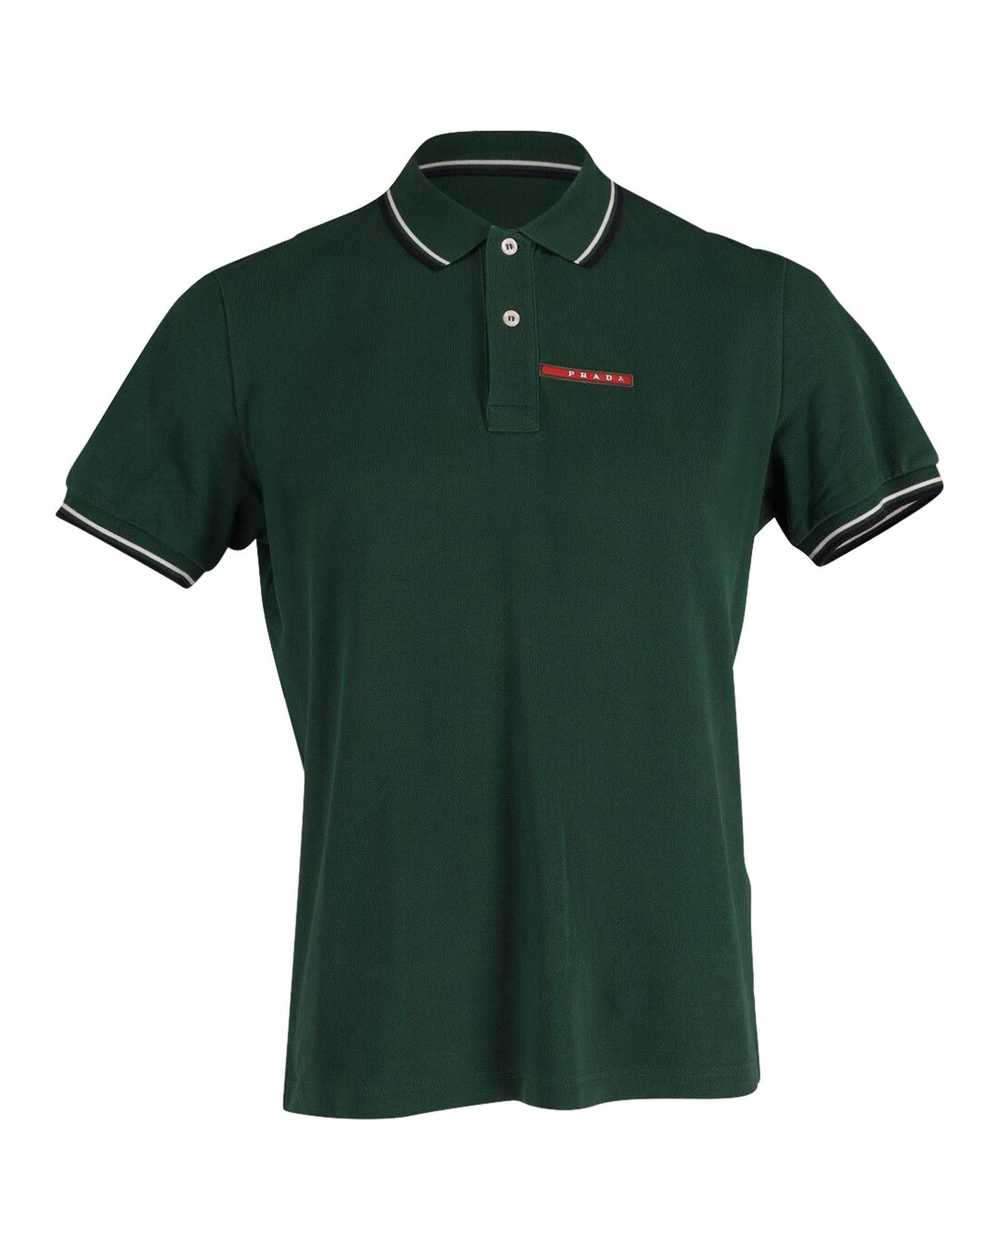 Prada Green Cotton Polo T-Shirt with Striped Coll… - image 1